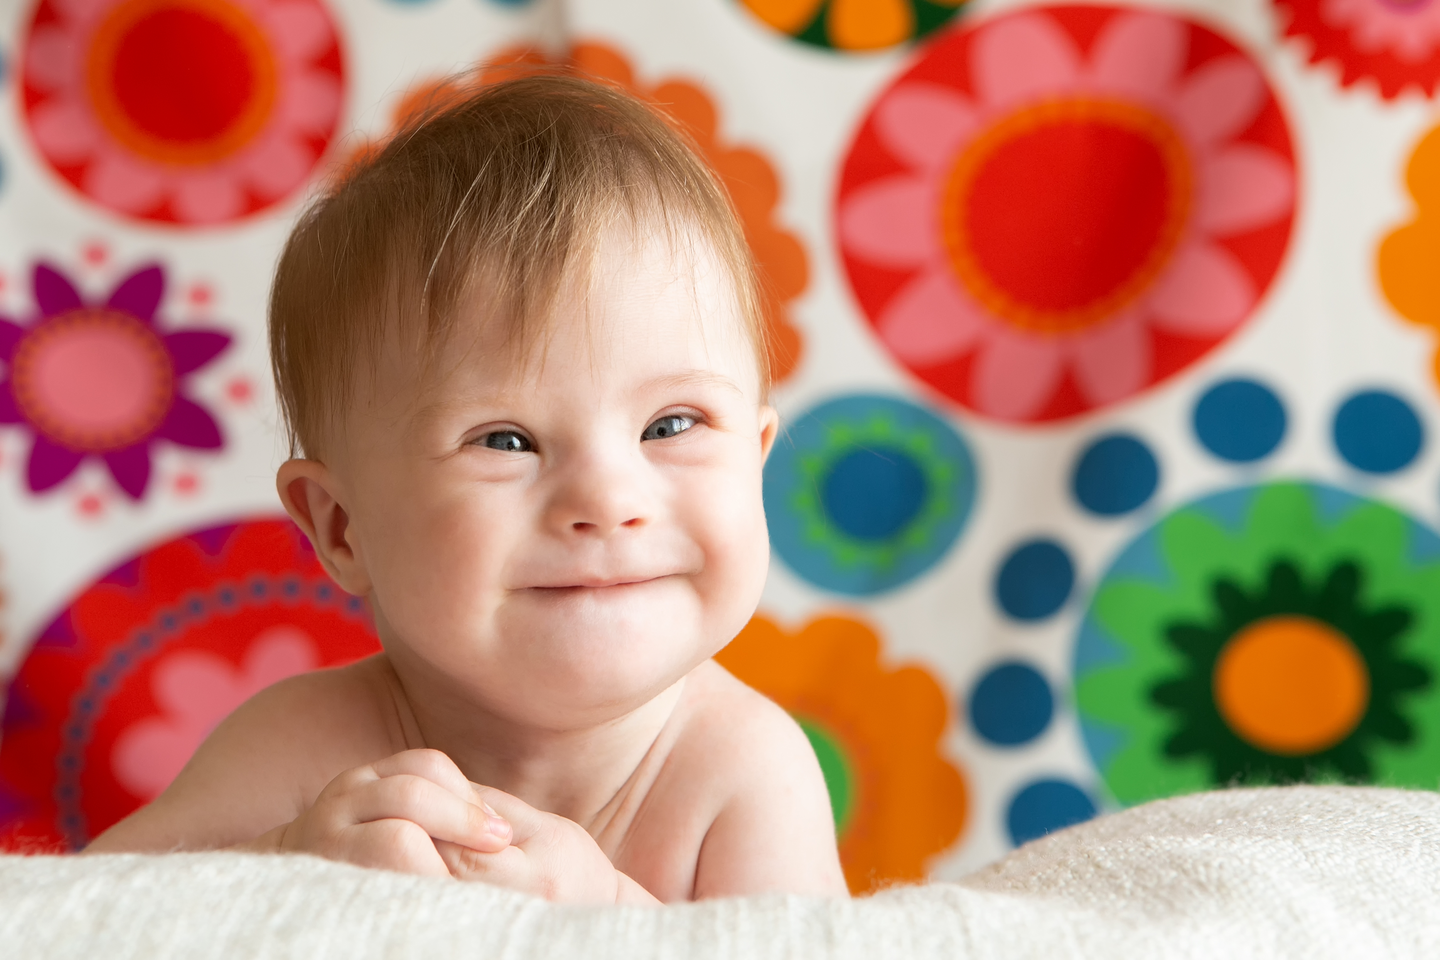 Smiling baby with Down syndrome